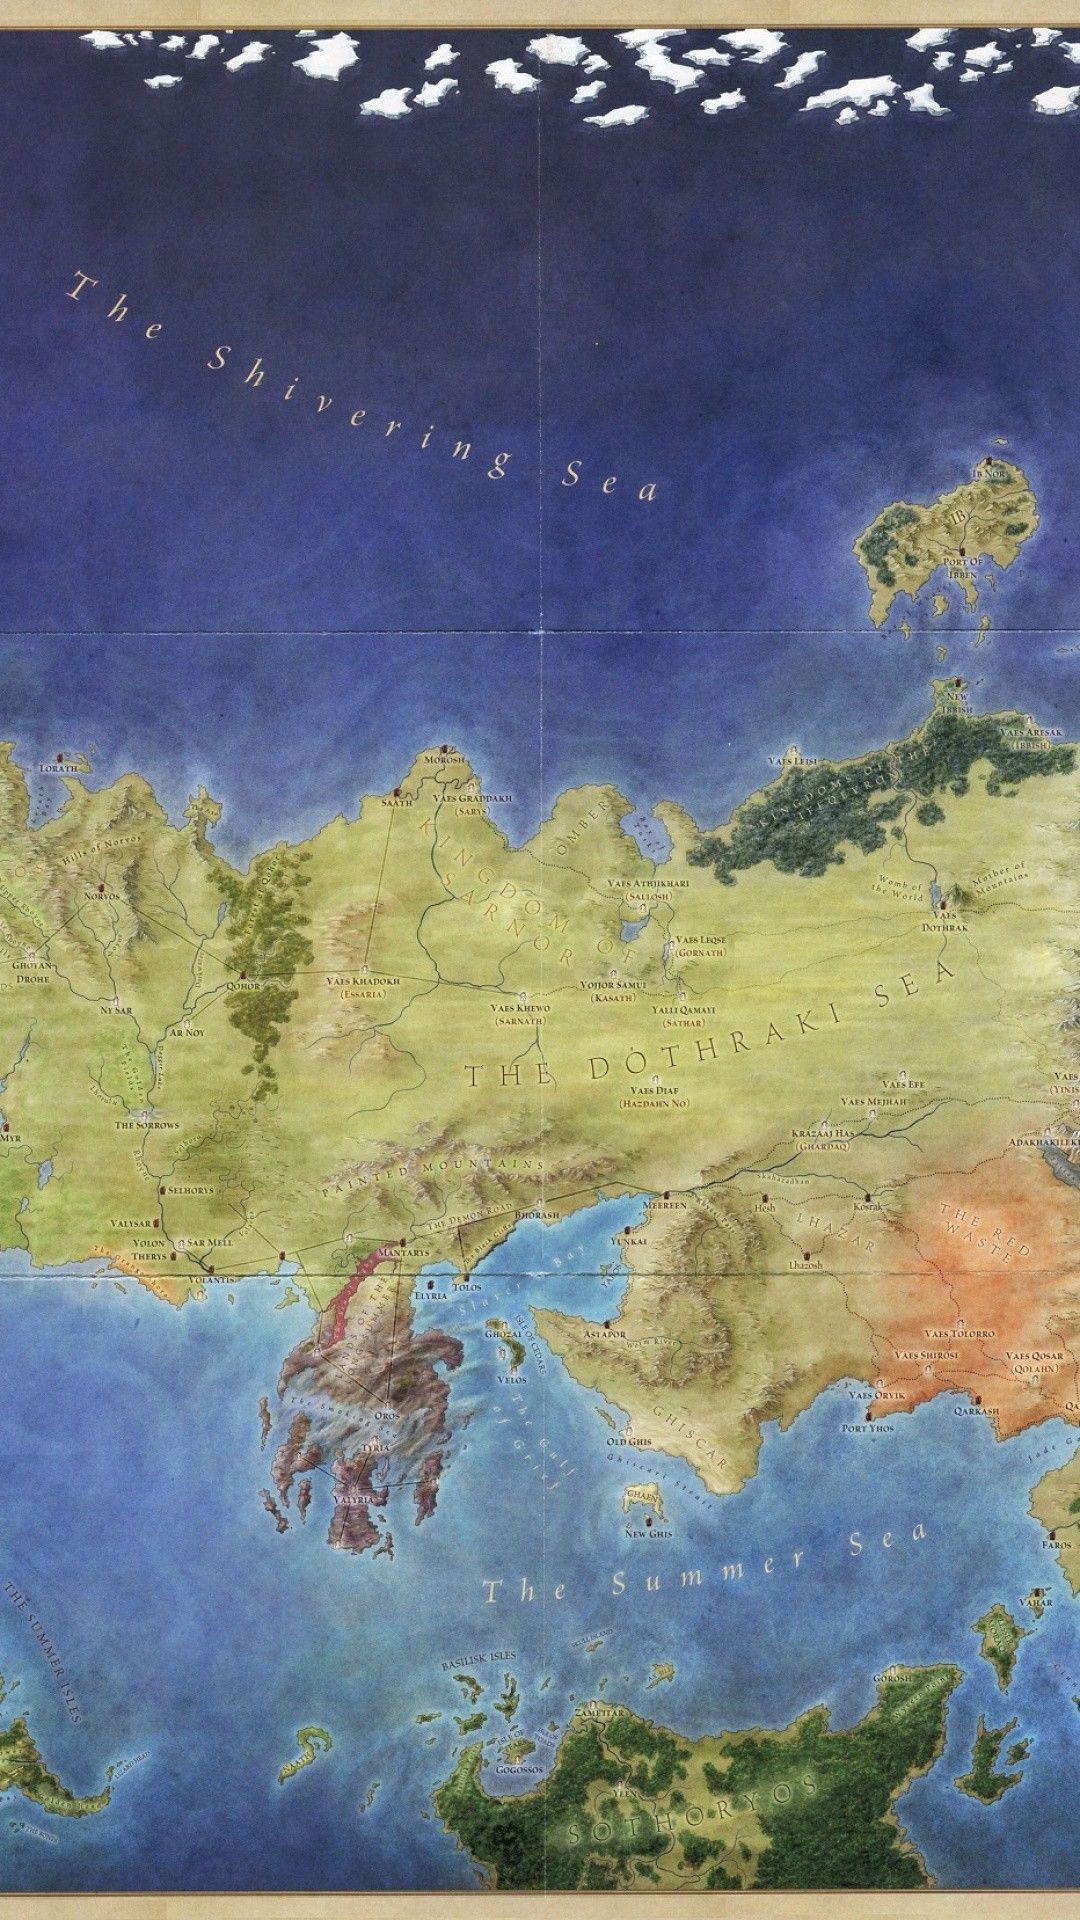 Game Of Thrones Map Wallpaper 1920x1080 77371